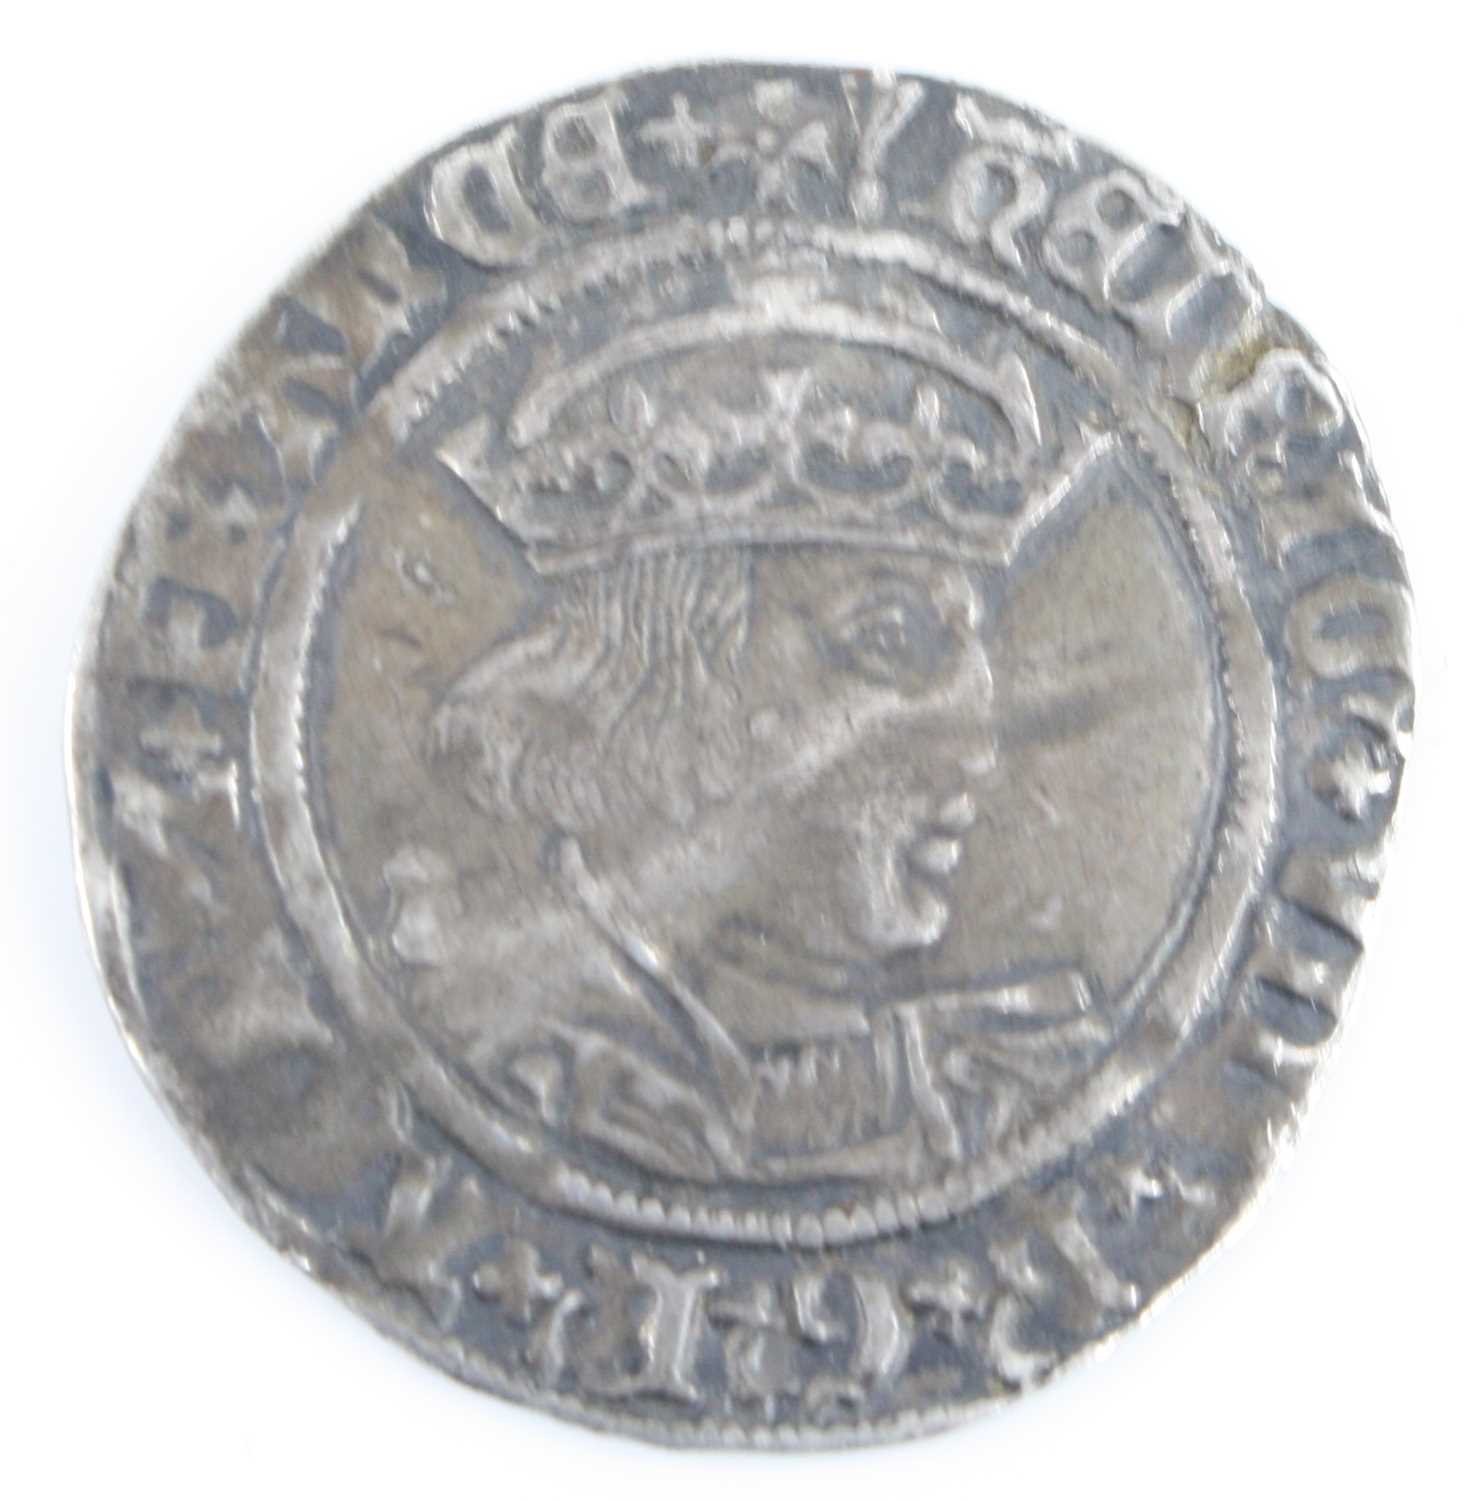 England, Henry VIII (1509-1547) groat, 2nd coinage (1526-44), obv: crowned and draped bust facing